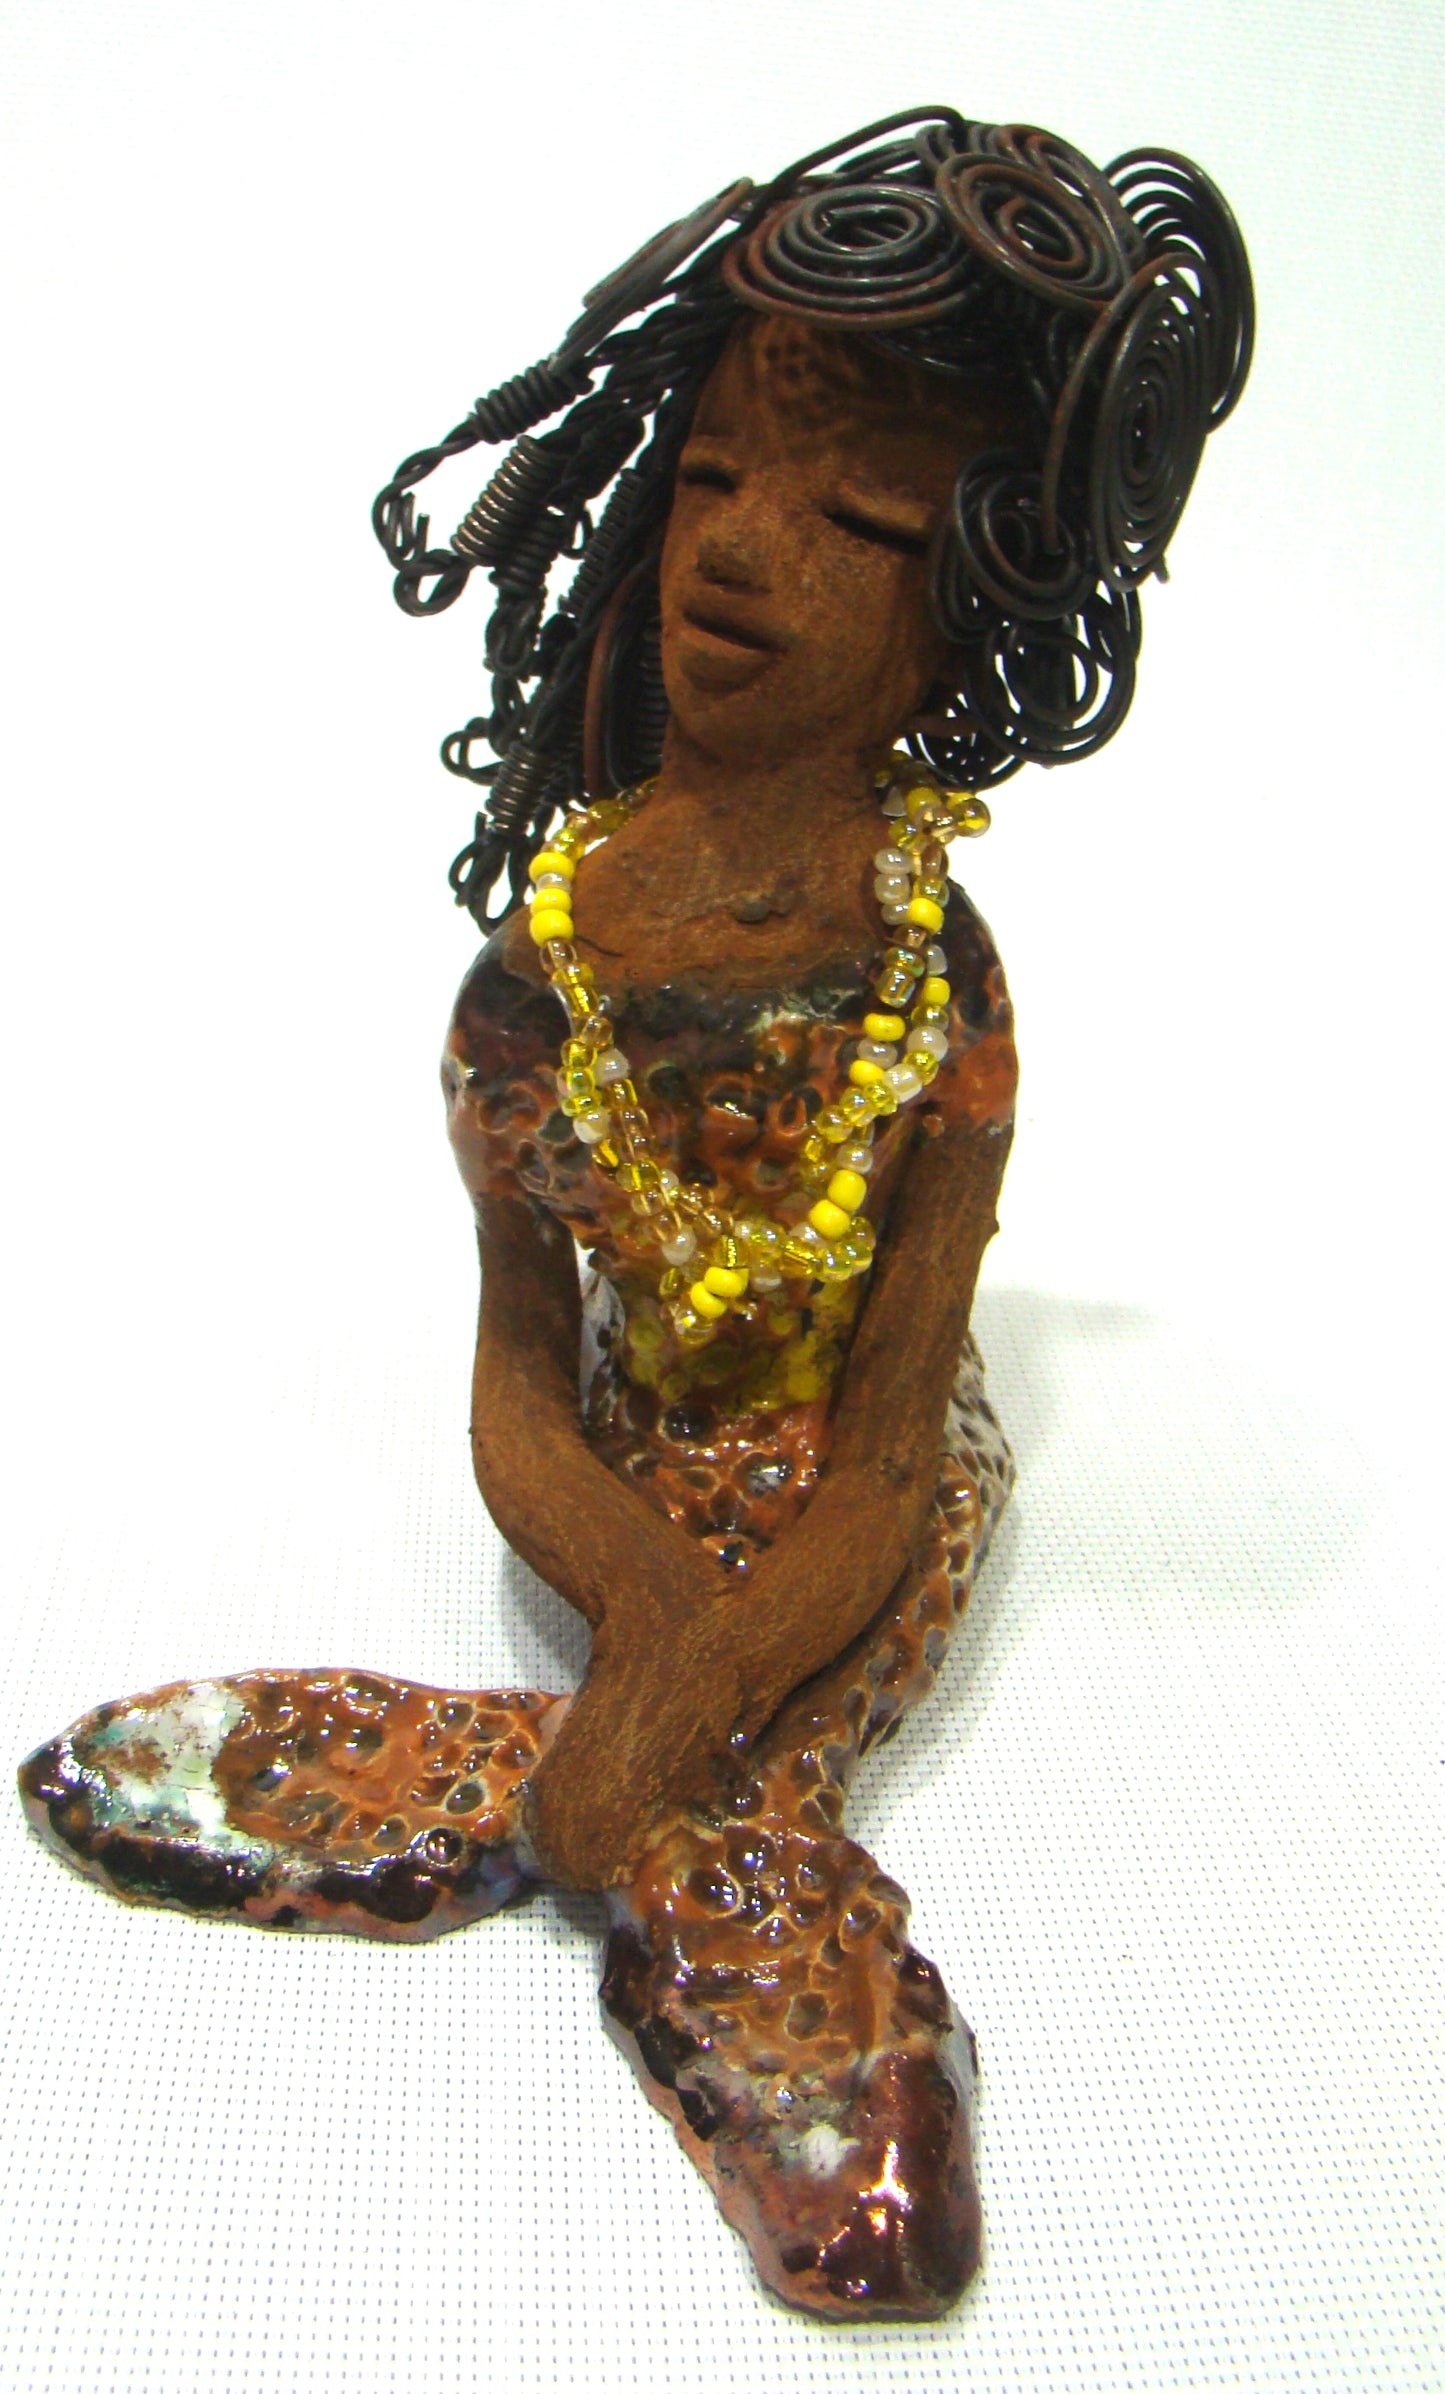 Meet Isabella the Mermaid!          Isabella stands 7' x 4" x 6" and weighs 1.08 lbs..         Isabella  has a lovely brown complexion.         Her long loving arms are crossed in her lap.         Isabella has over 20 feet of  wire hair.         It took over two hours to fix her hair!         Isabella has a metallic yellow swimsuit with flashes of copper.         She wears a yellow beaded necklace.  Isabella appears to have something on her mind!